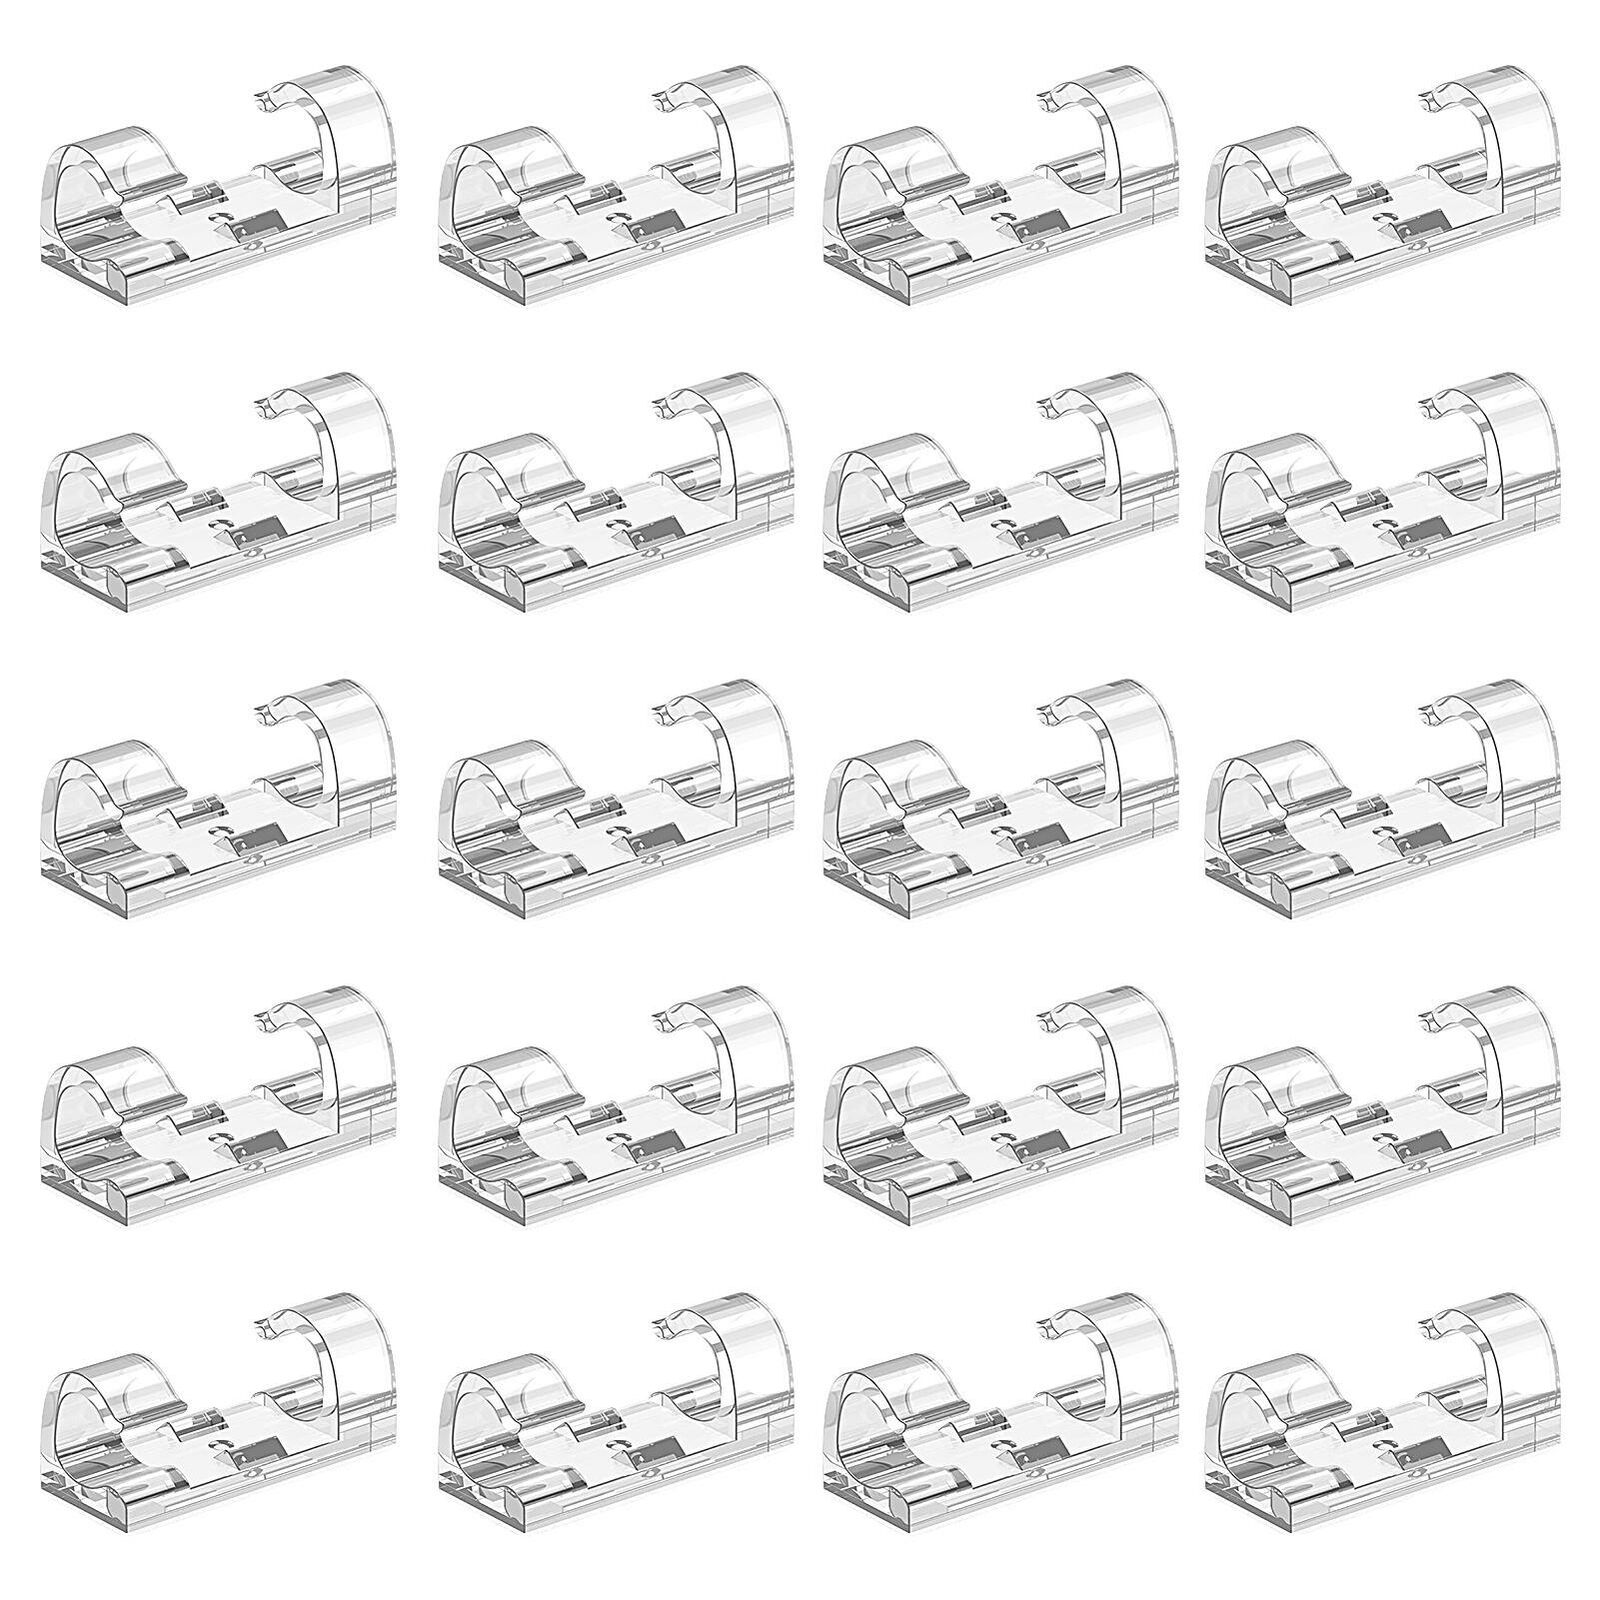 20PCS Self-Adhesive Cable Management Clips Wire Clamp Holder Wall Desk Organiser